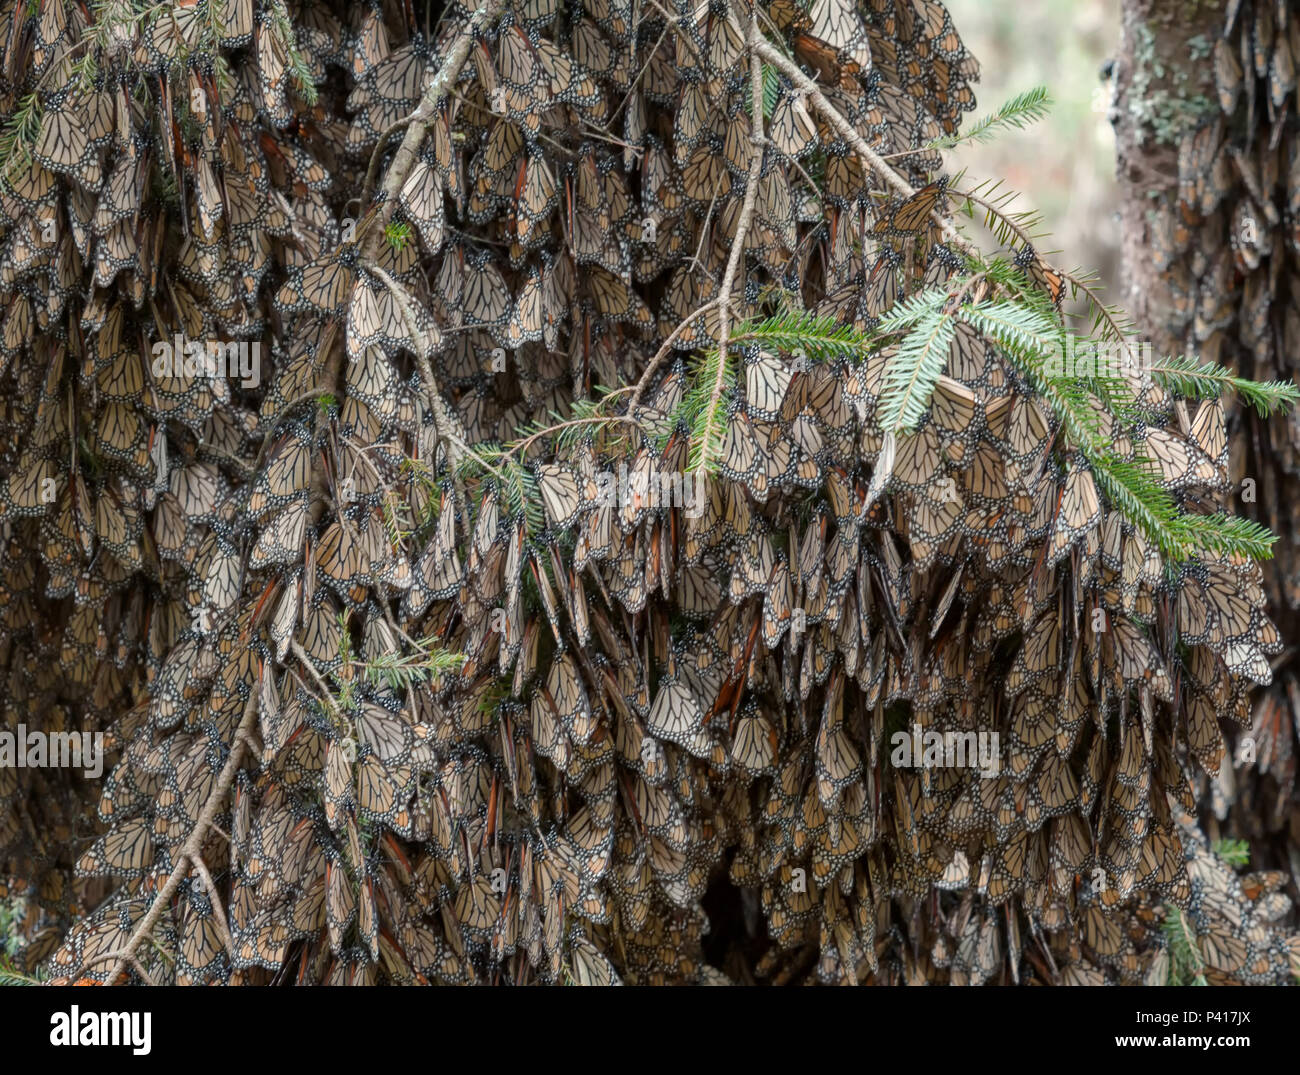 Monarch Butterflies clustered on tree branches over-wintering in the forests in Mexico. Stock Photo